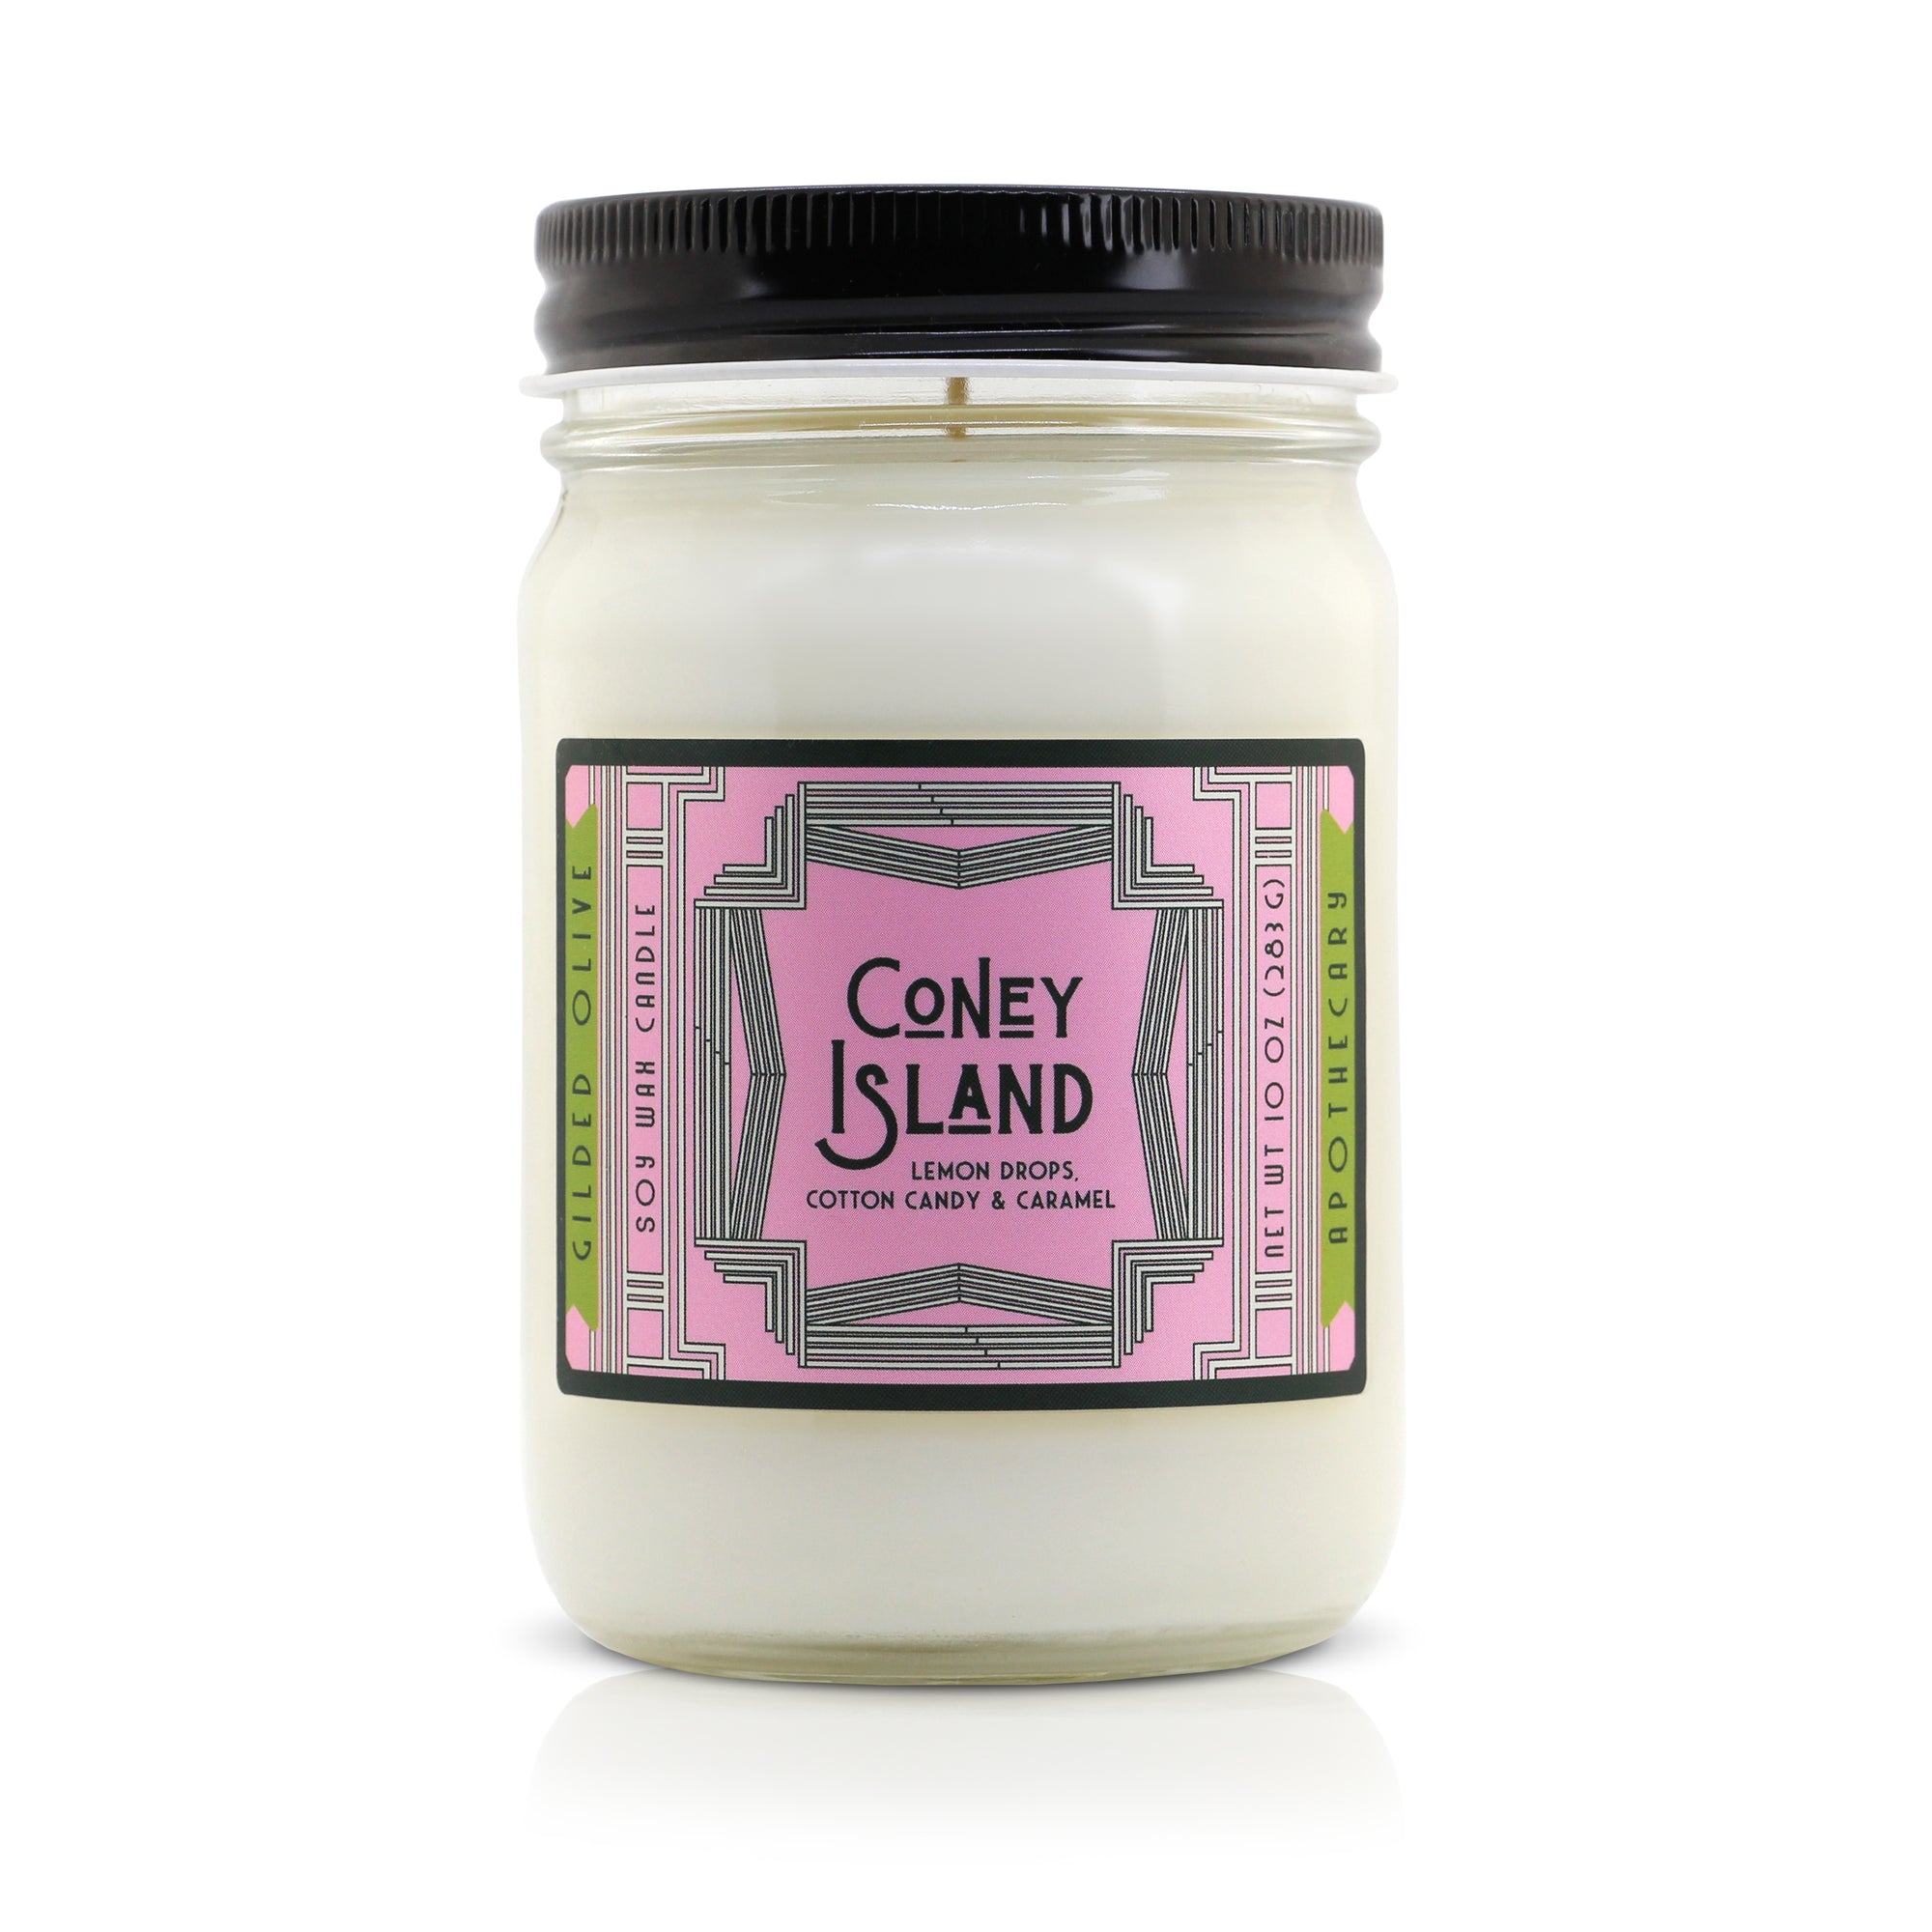 Coney Island Soy Wax Candle 12 oz jar | Gilded Olive Apothecary